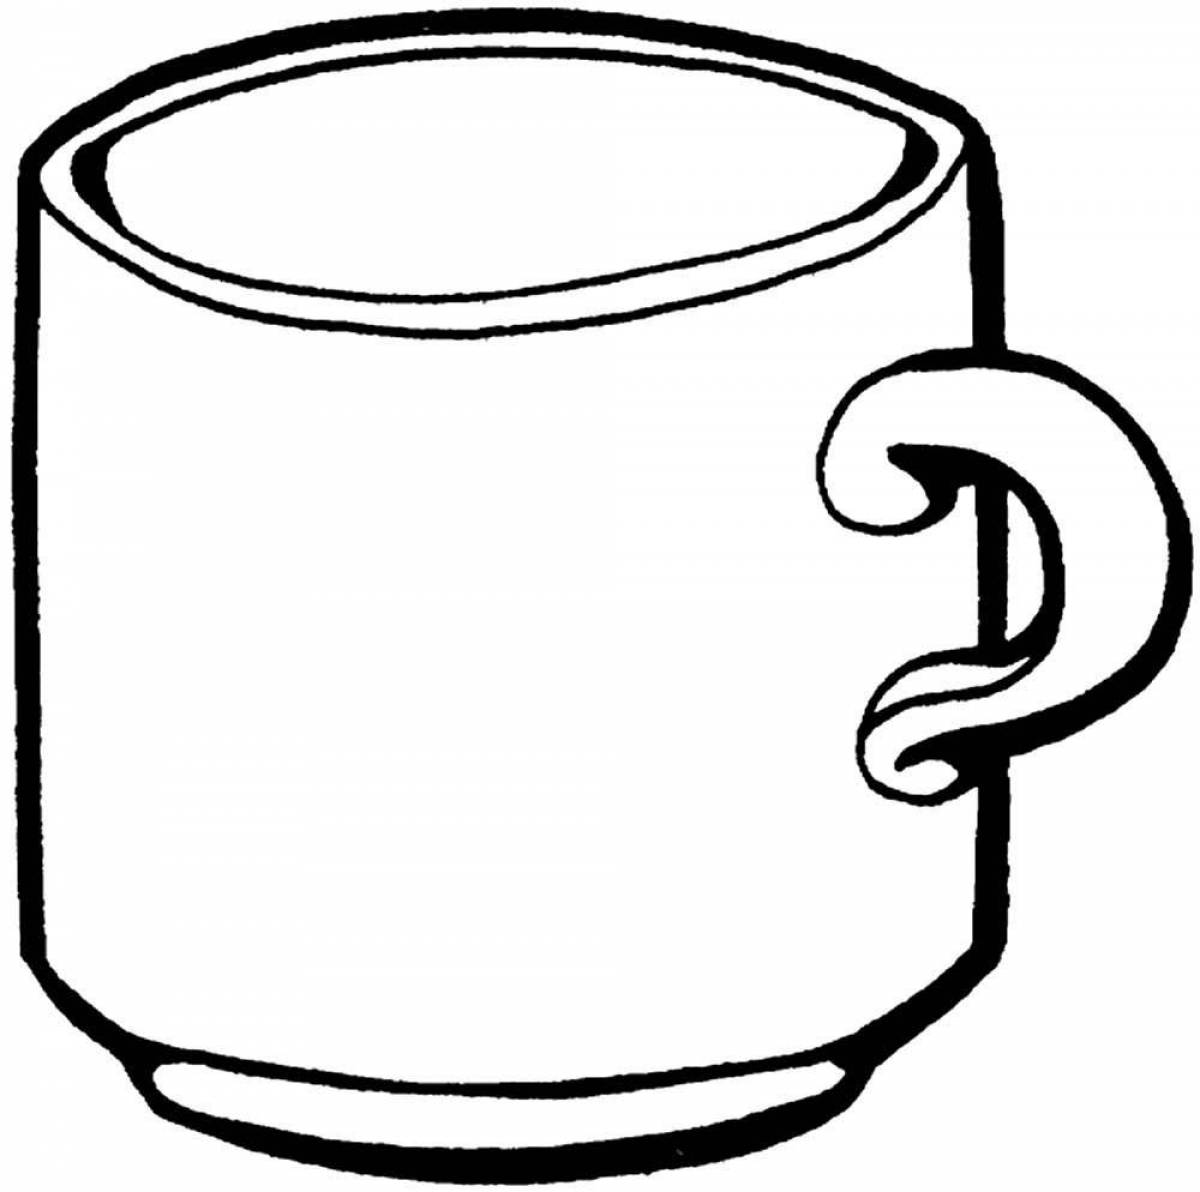 Exquisite cup coloring page